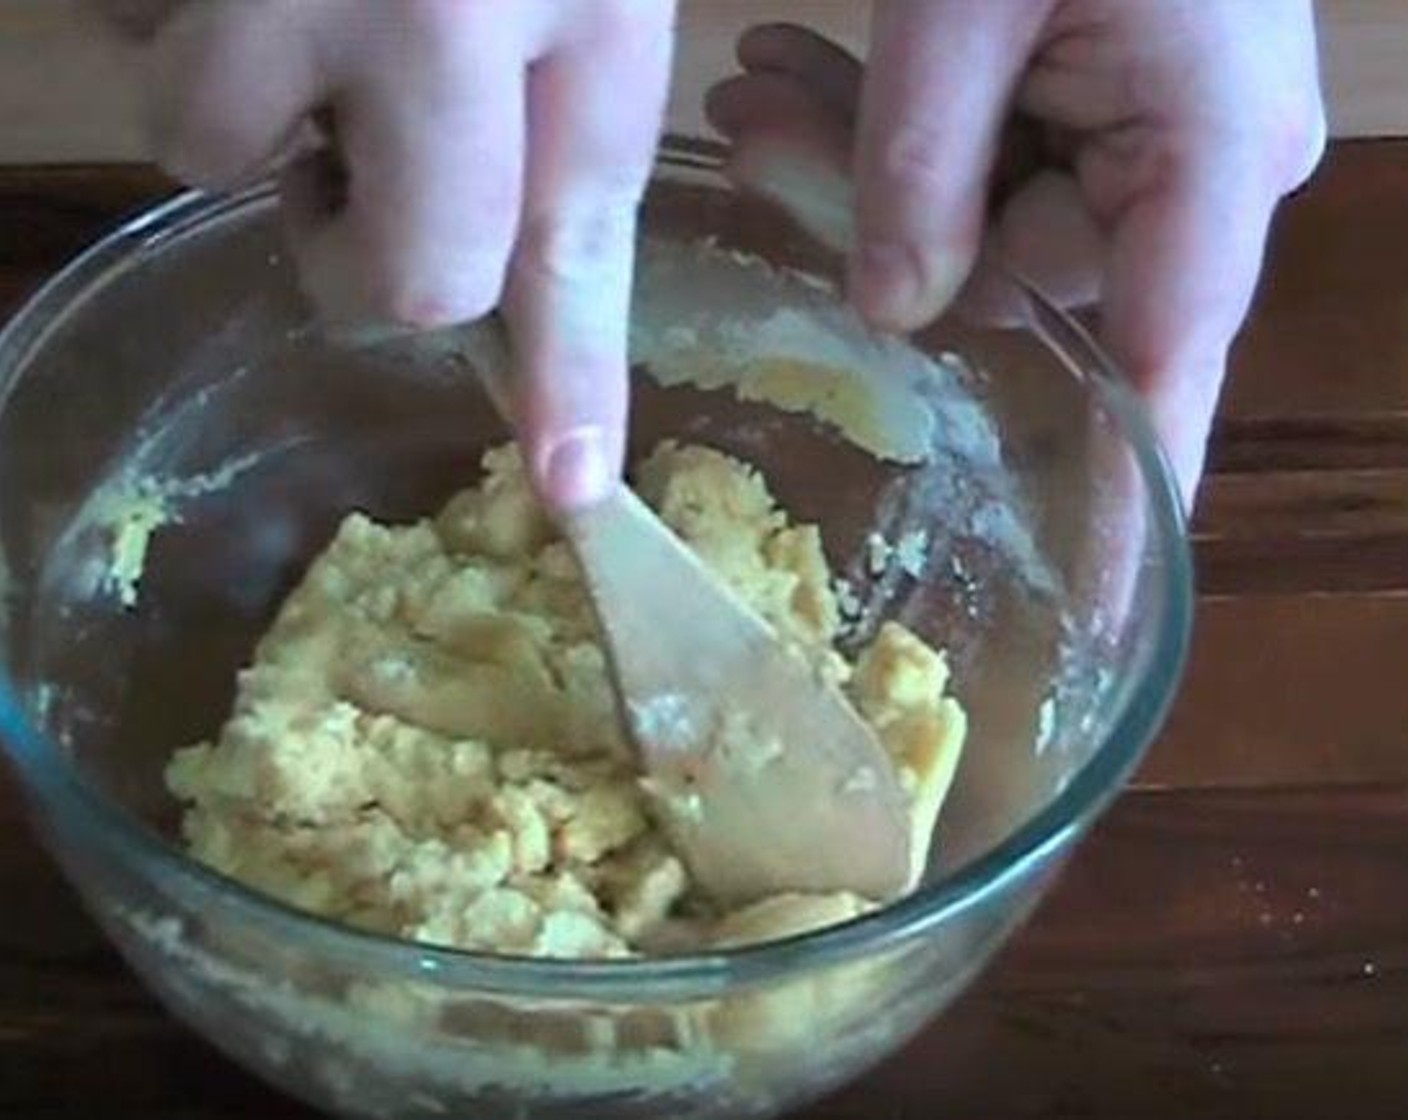 step 2 In a mixing bowl, add All-Purpose Flour (1 1/2 cups), Powdered Confectioners Sugar (1/2 cup), and Butter (2/3 cup). Mix together.